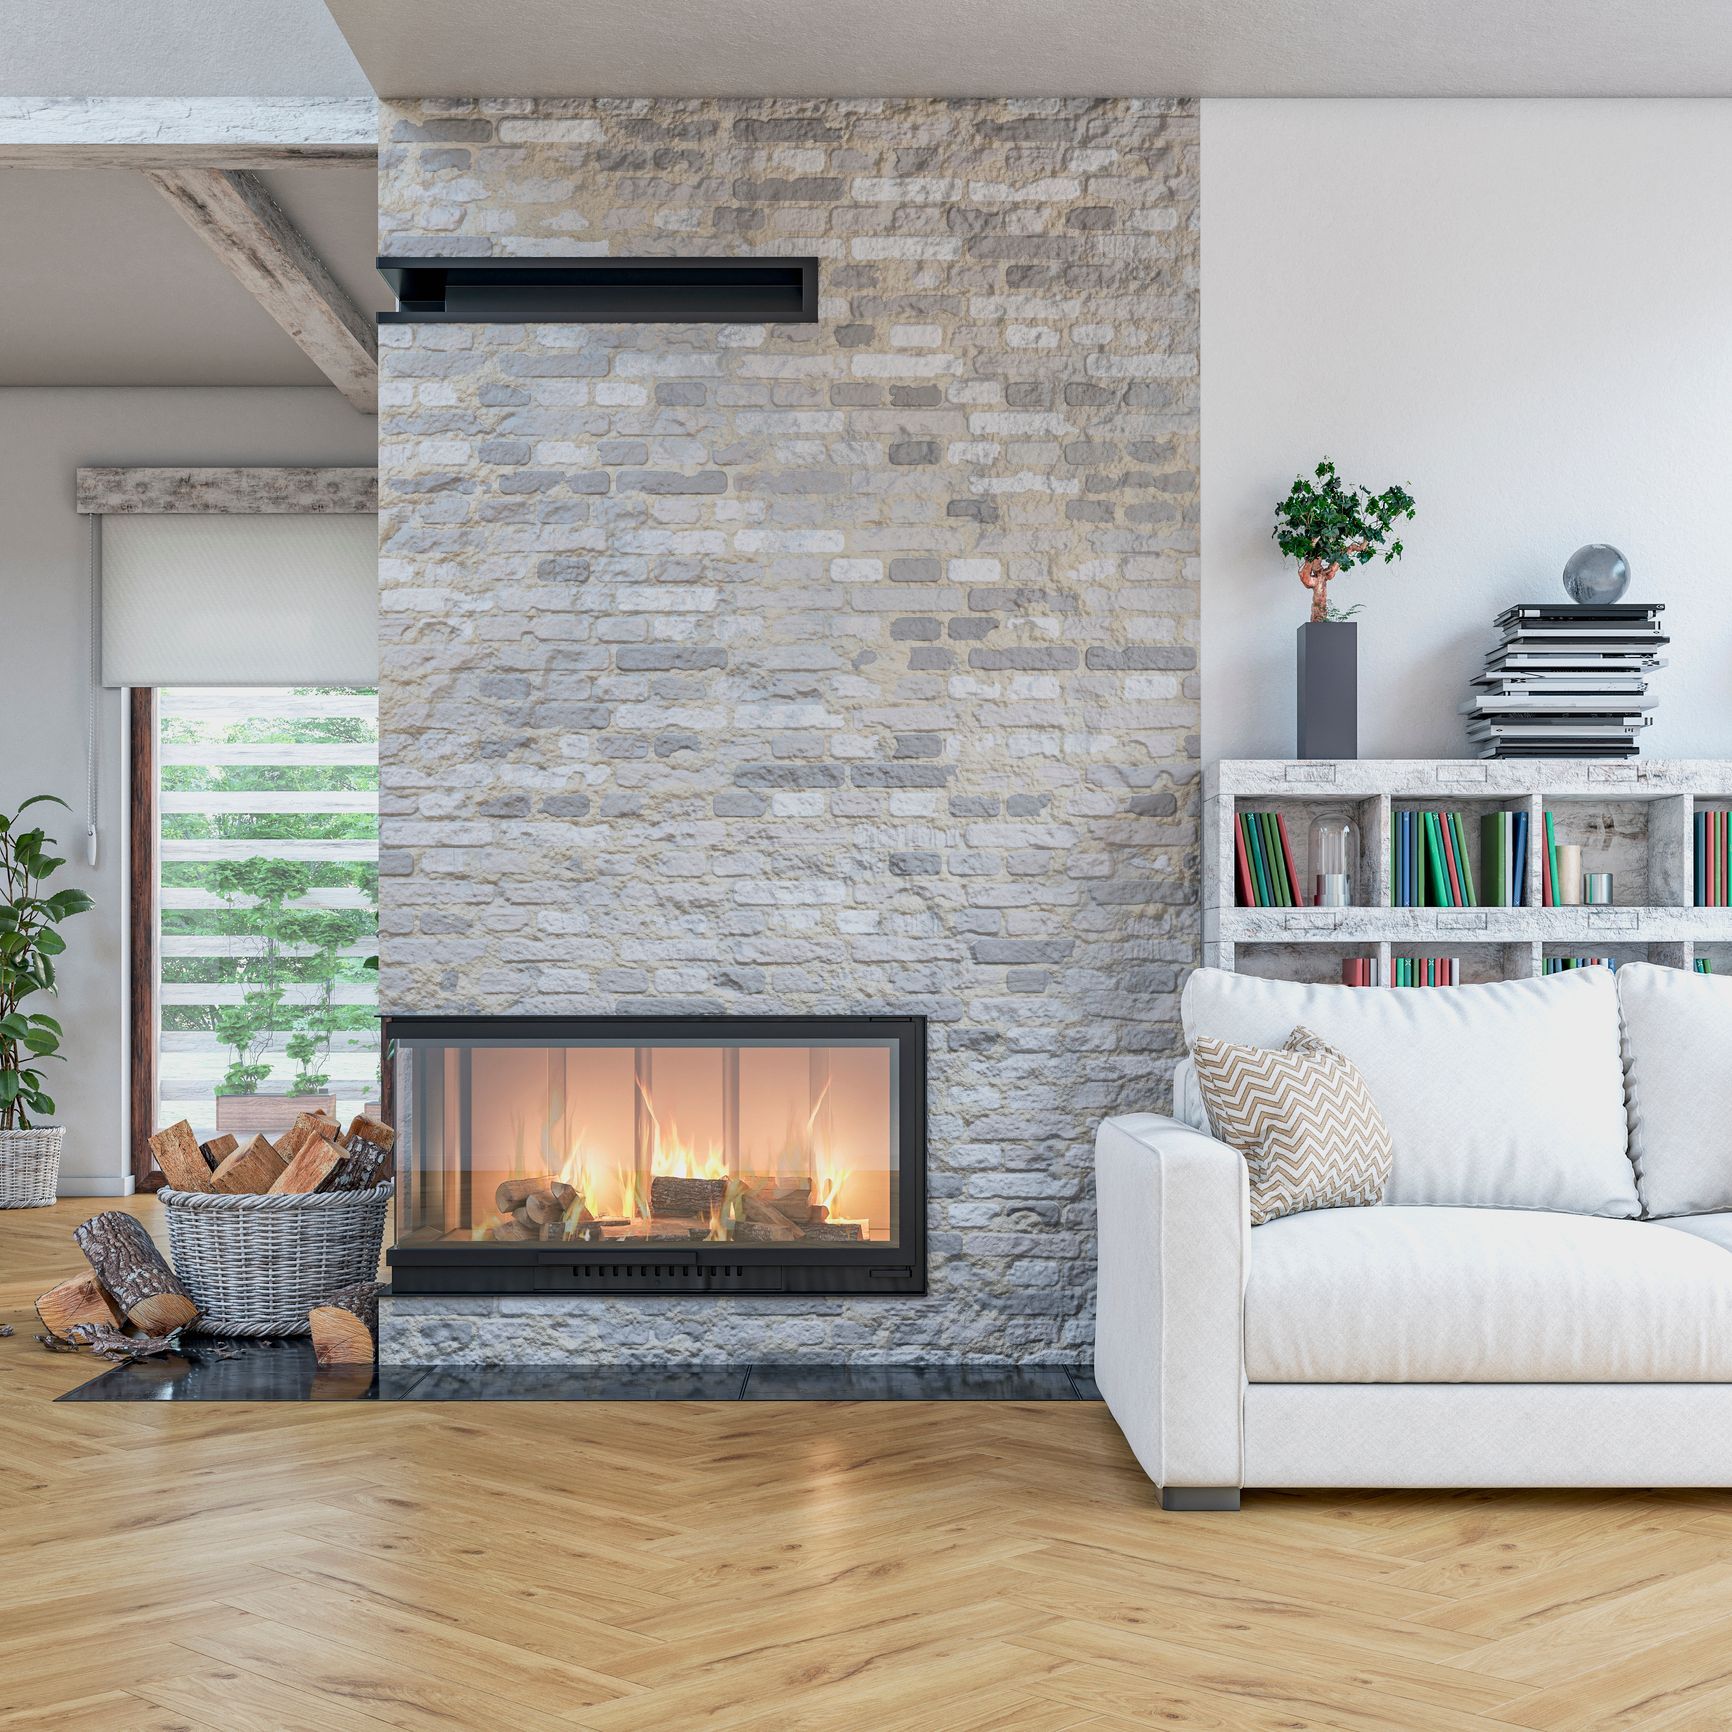 Discover the hottest trends in chimney and fireplace design for your District Heights, MD home. Elev